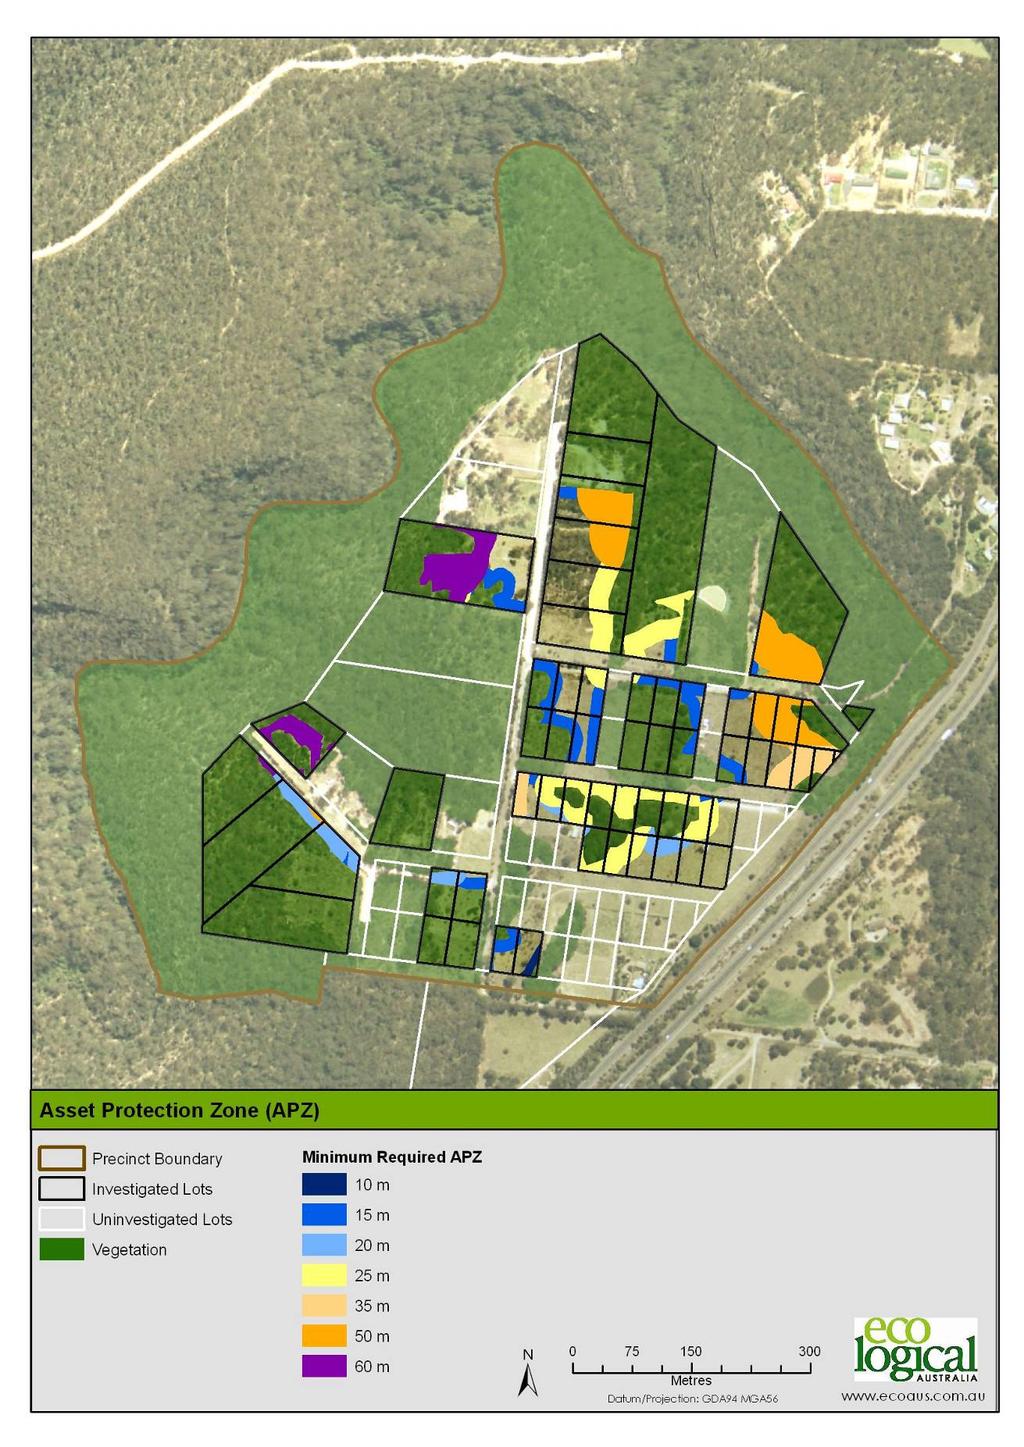 Figure 4: Summary of Asset Protection Zones for Bushfire Threat This map cannot be relied on for determining APZ requirements